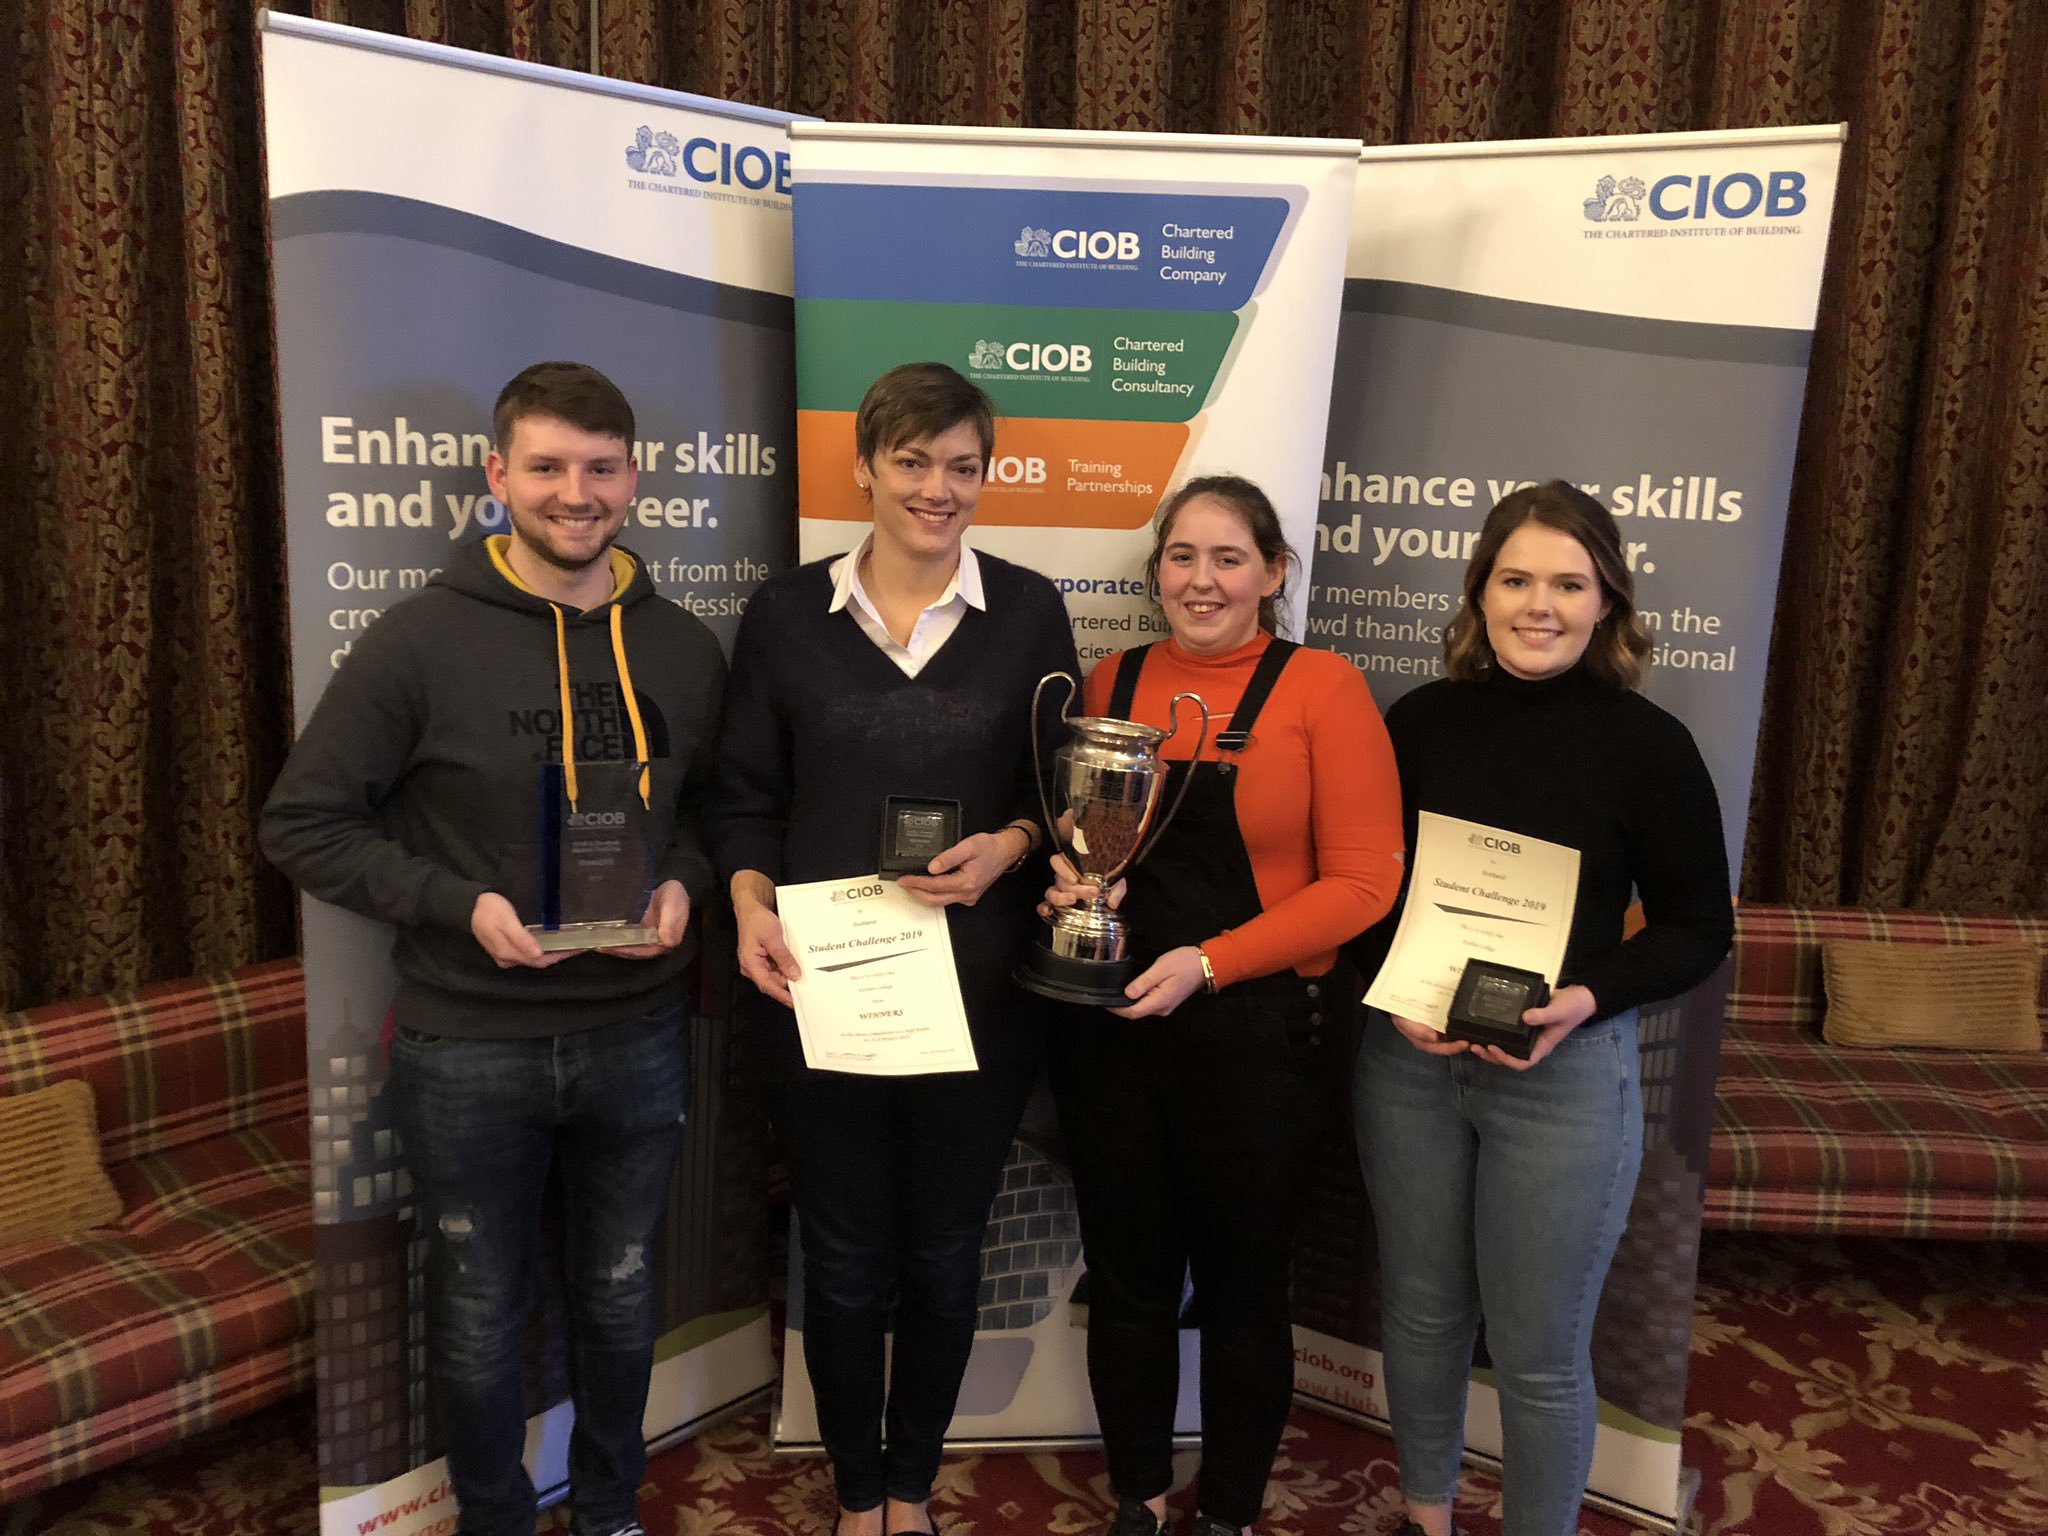 Ayrshire students win national Construction challenge